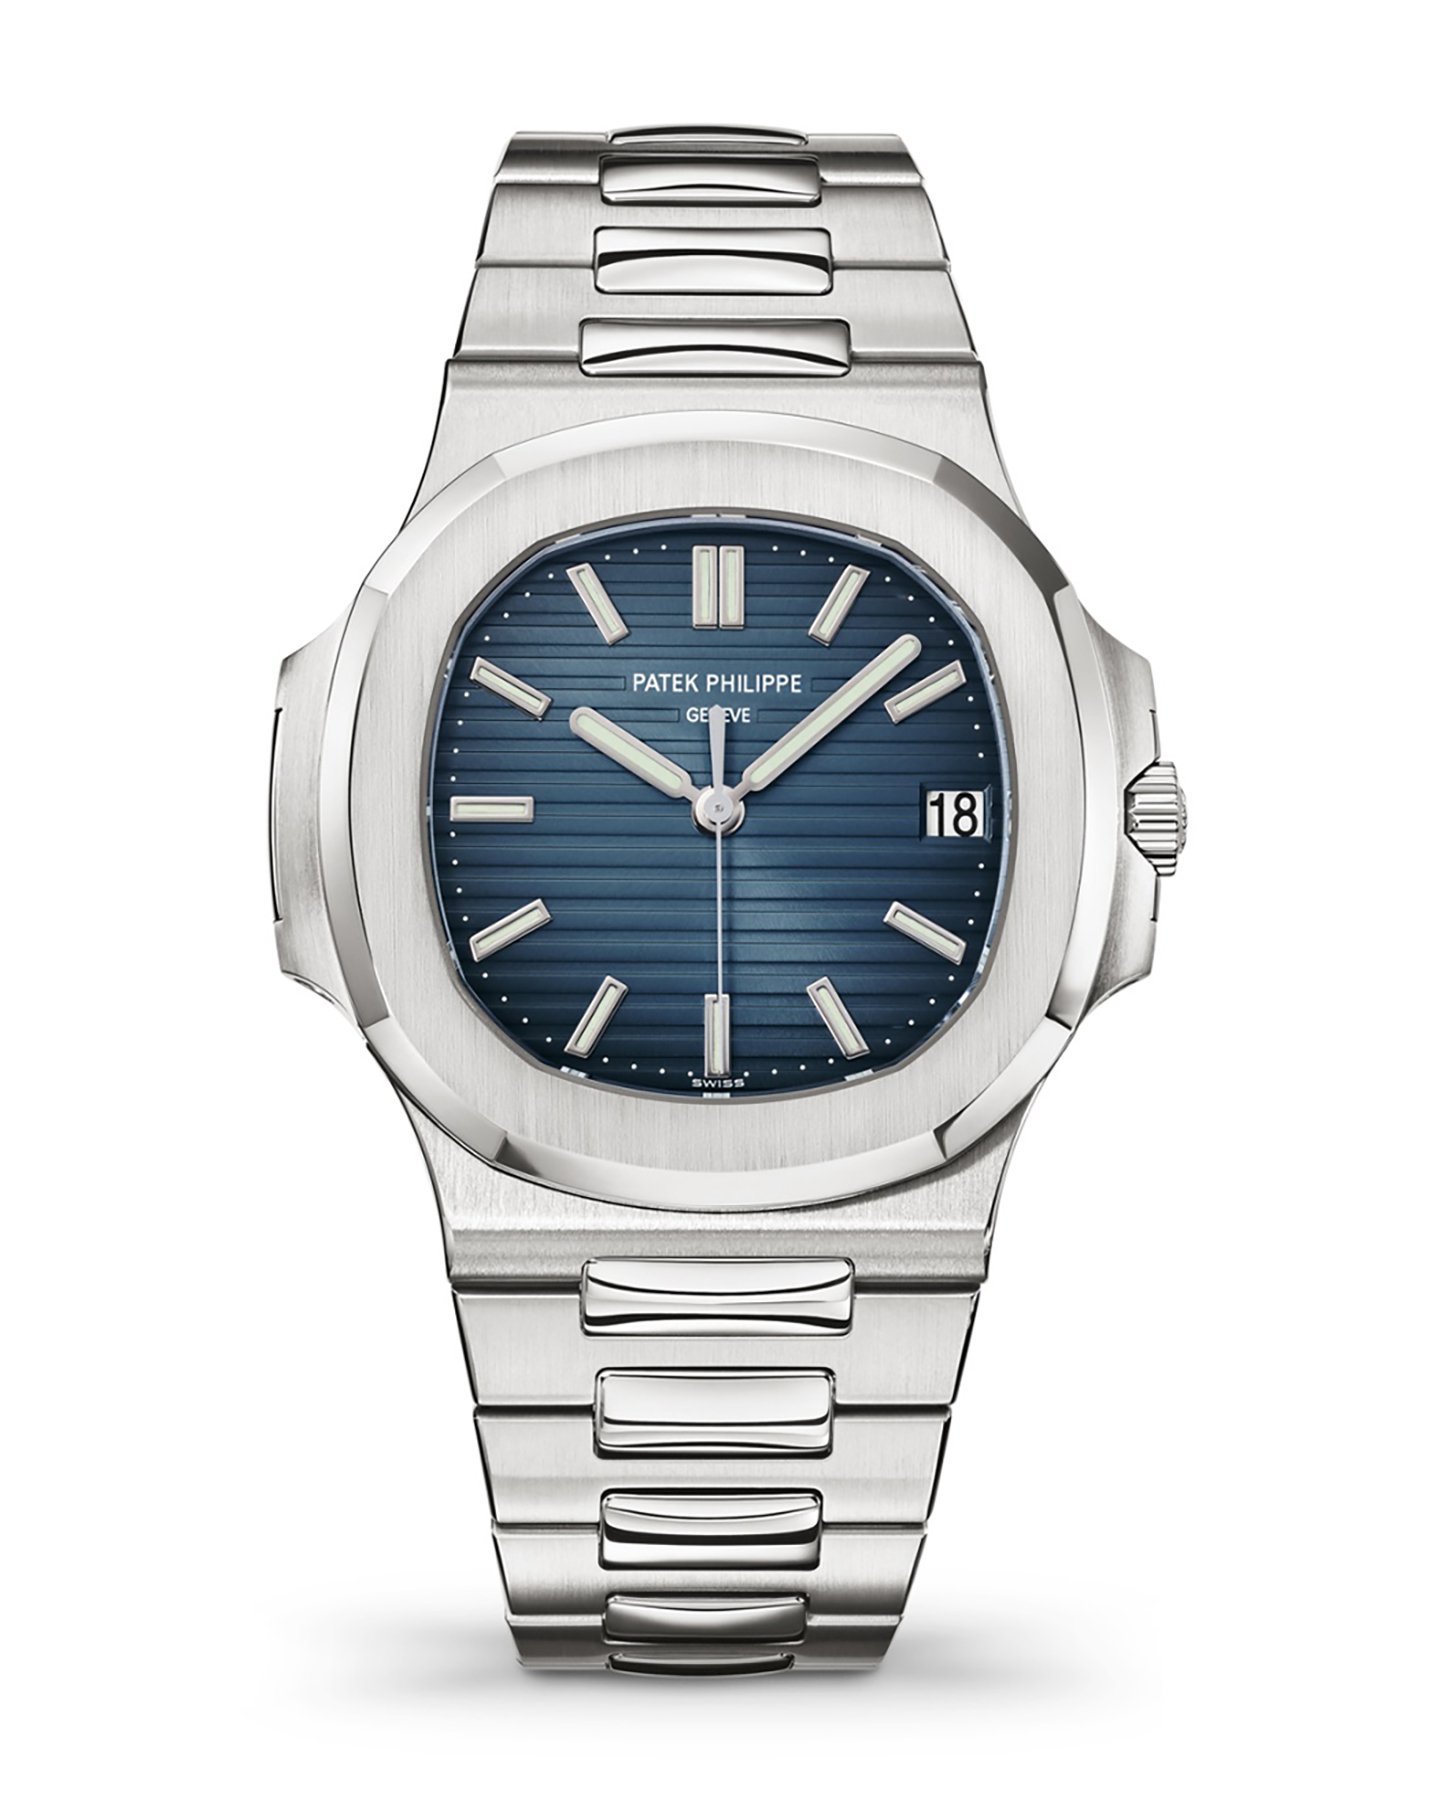 Factors to Consider Before Investing in Patek Philippe